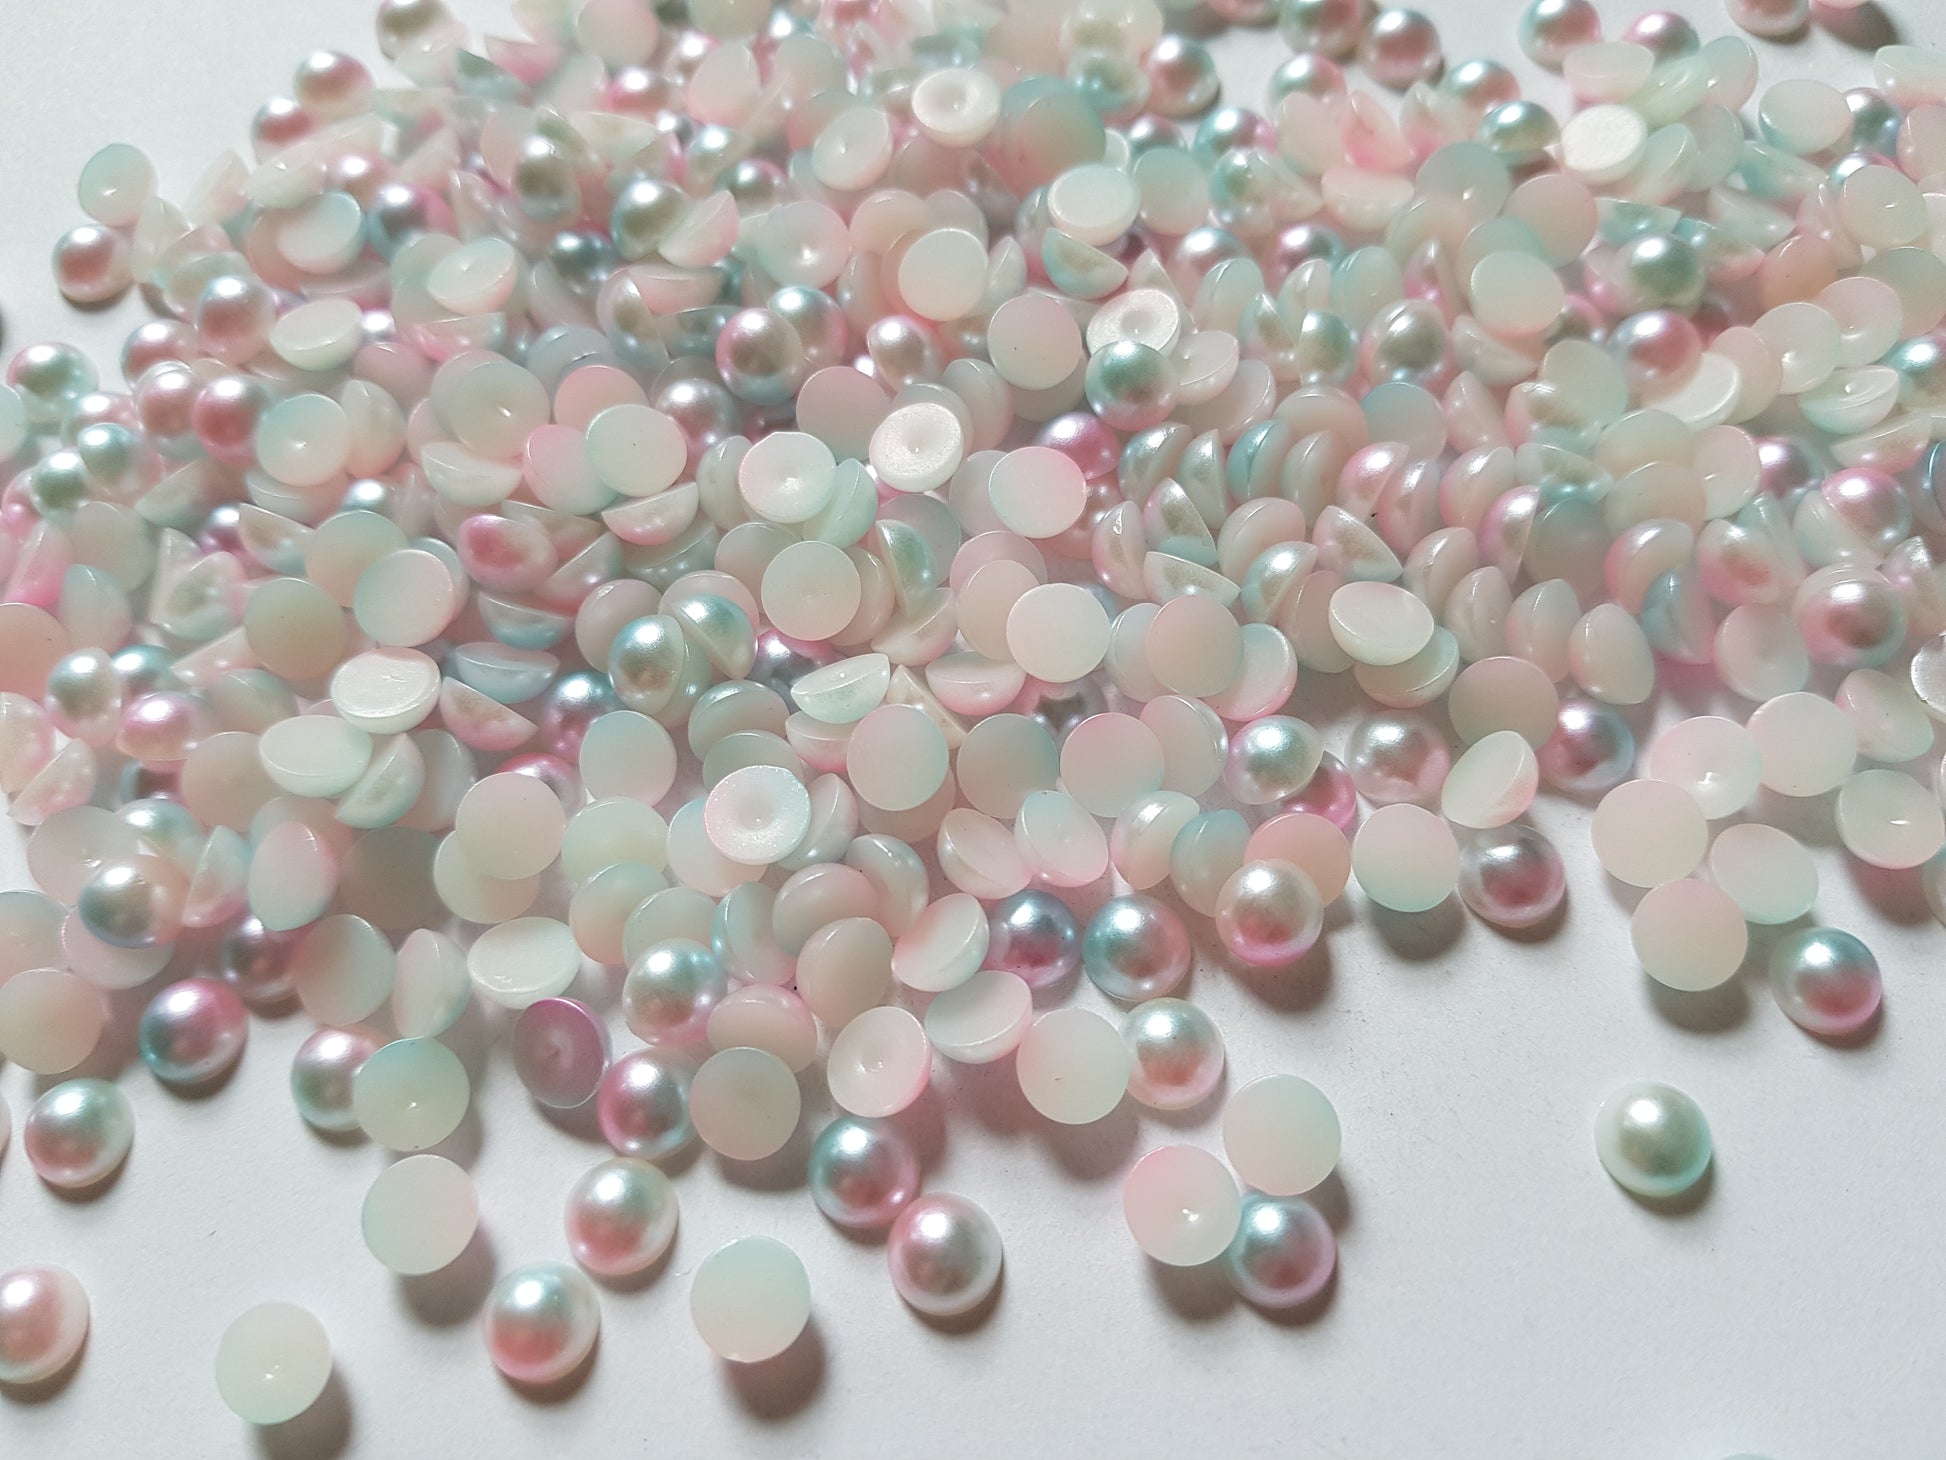 6mm 2-tone acrylic pearl cabochons - pale blue/pale pink